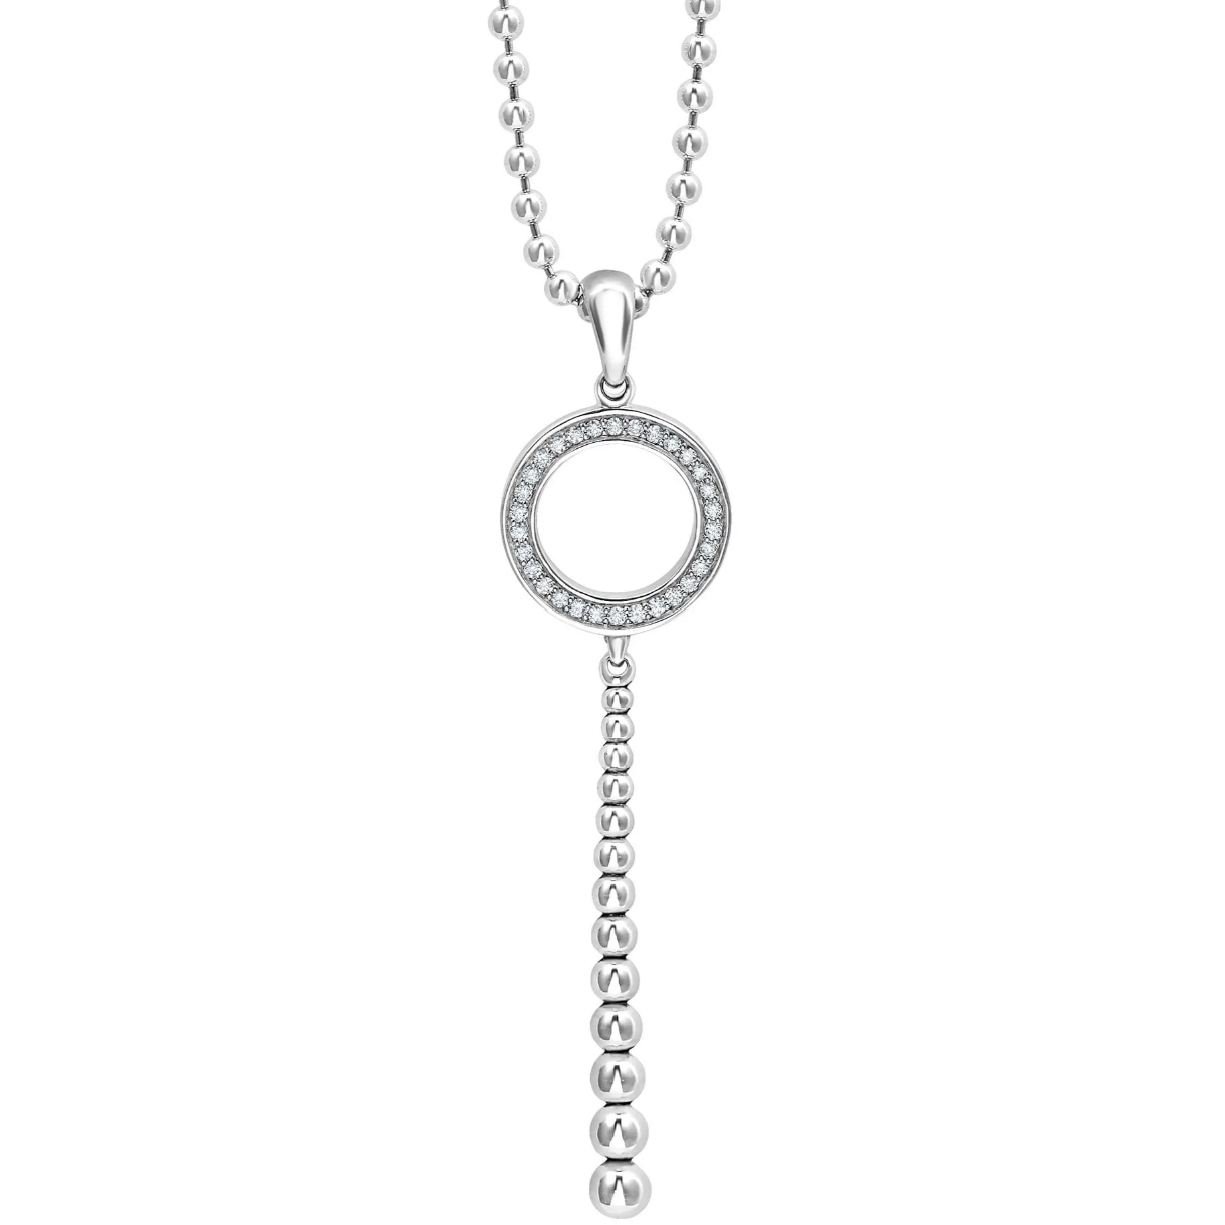 Lagos Signature Sterling Silver Key Pendant Necklace, 34